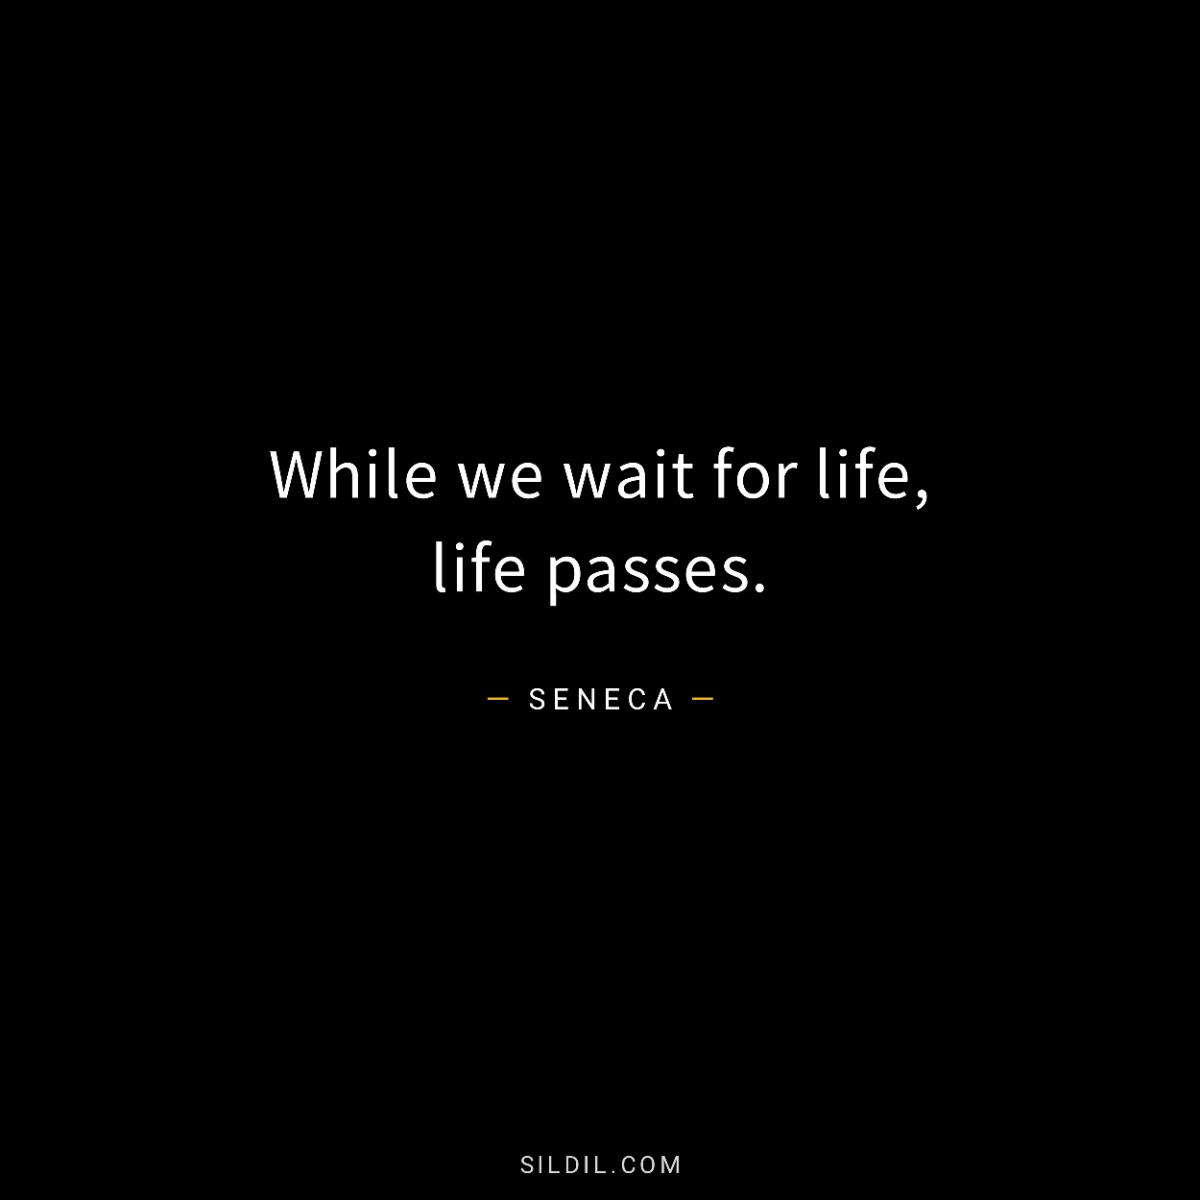 While we wait for life, life passes.